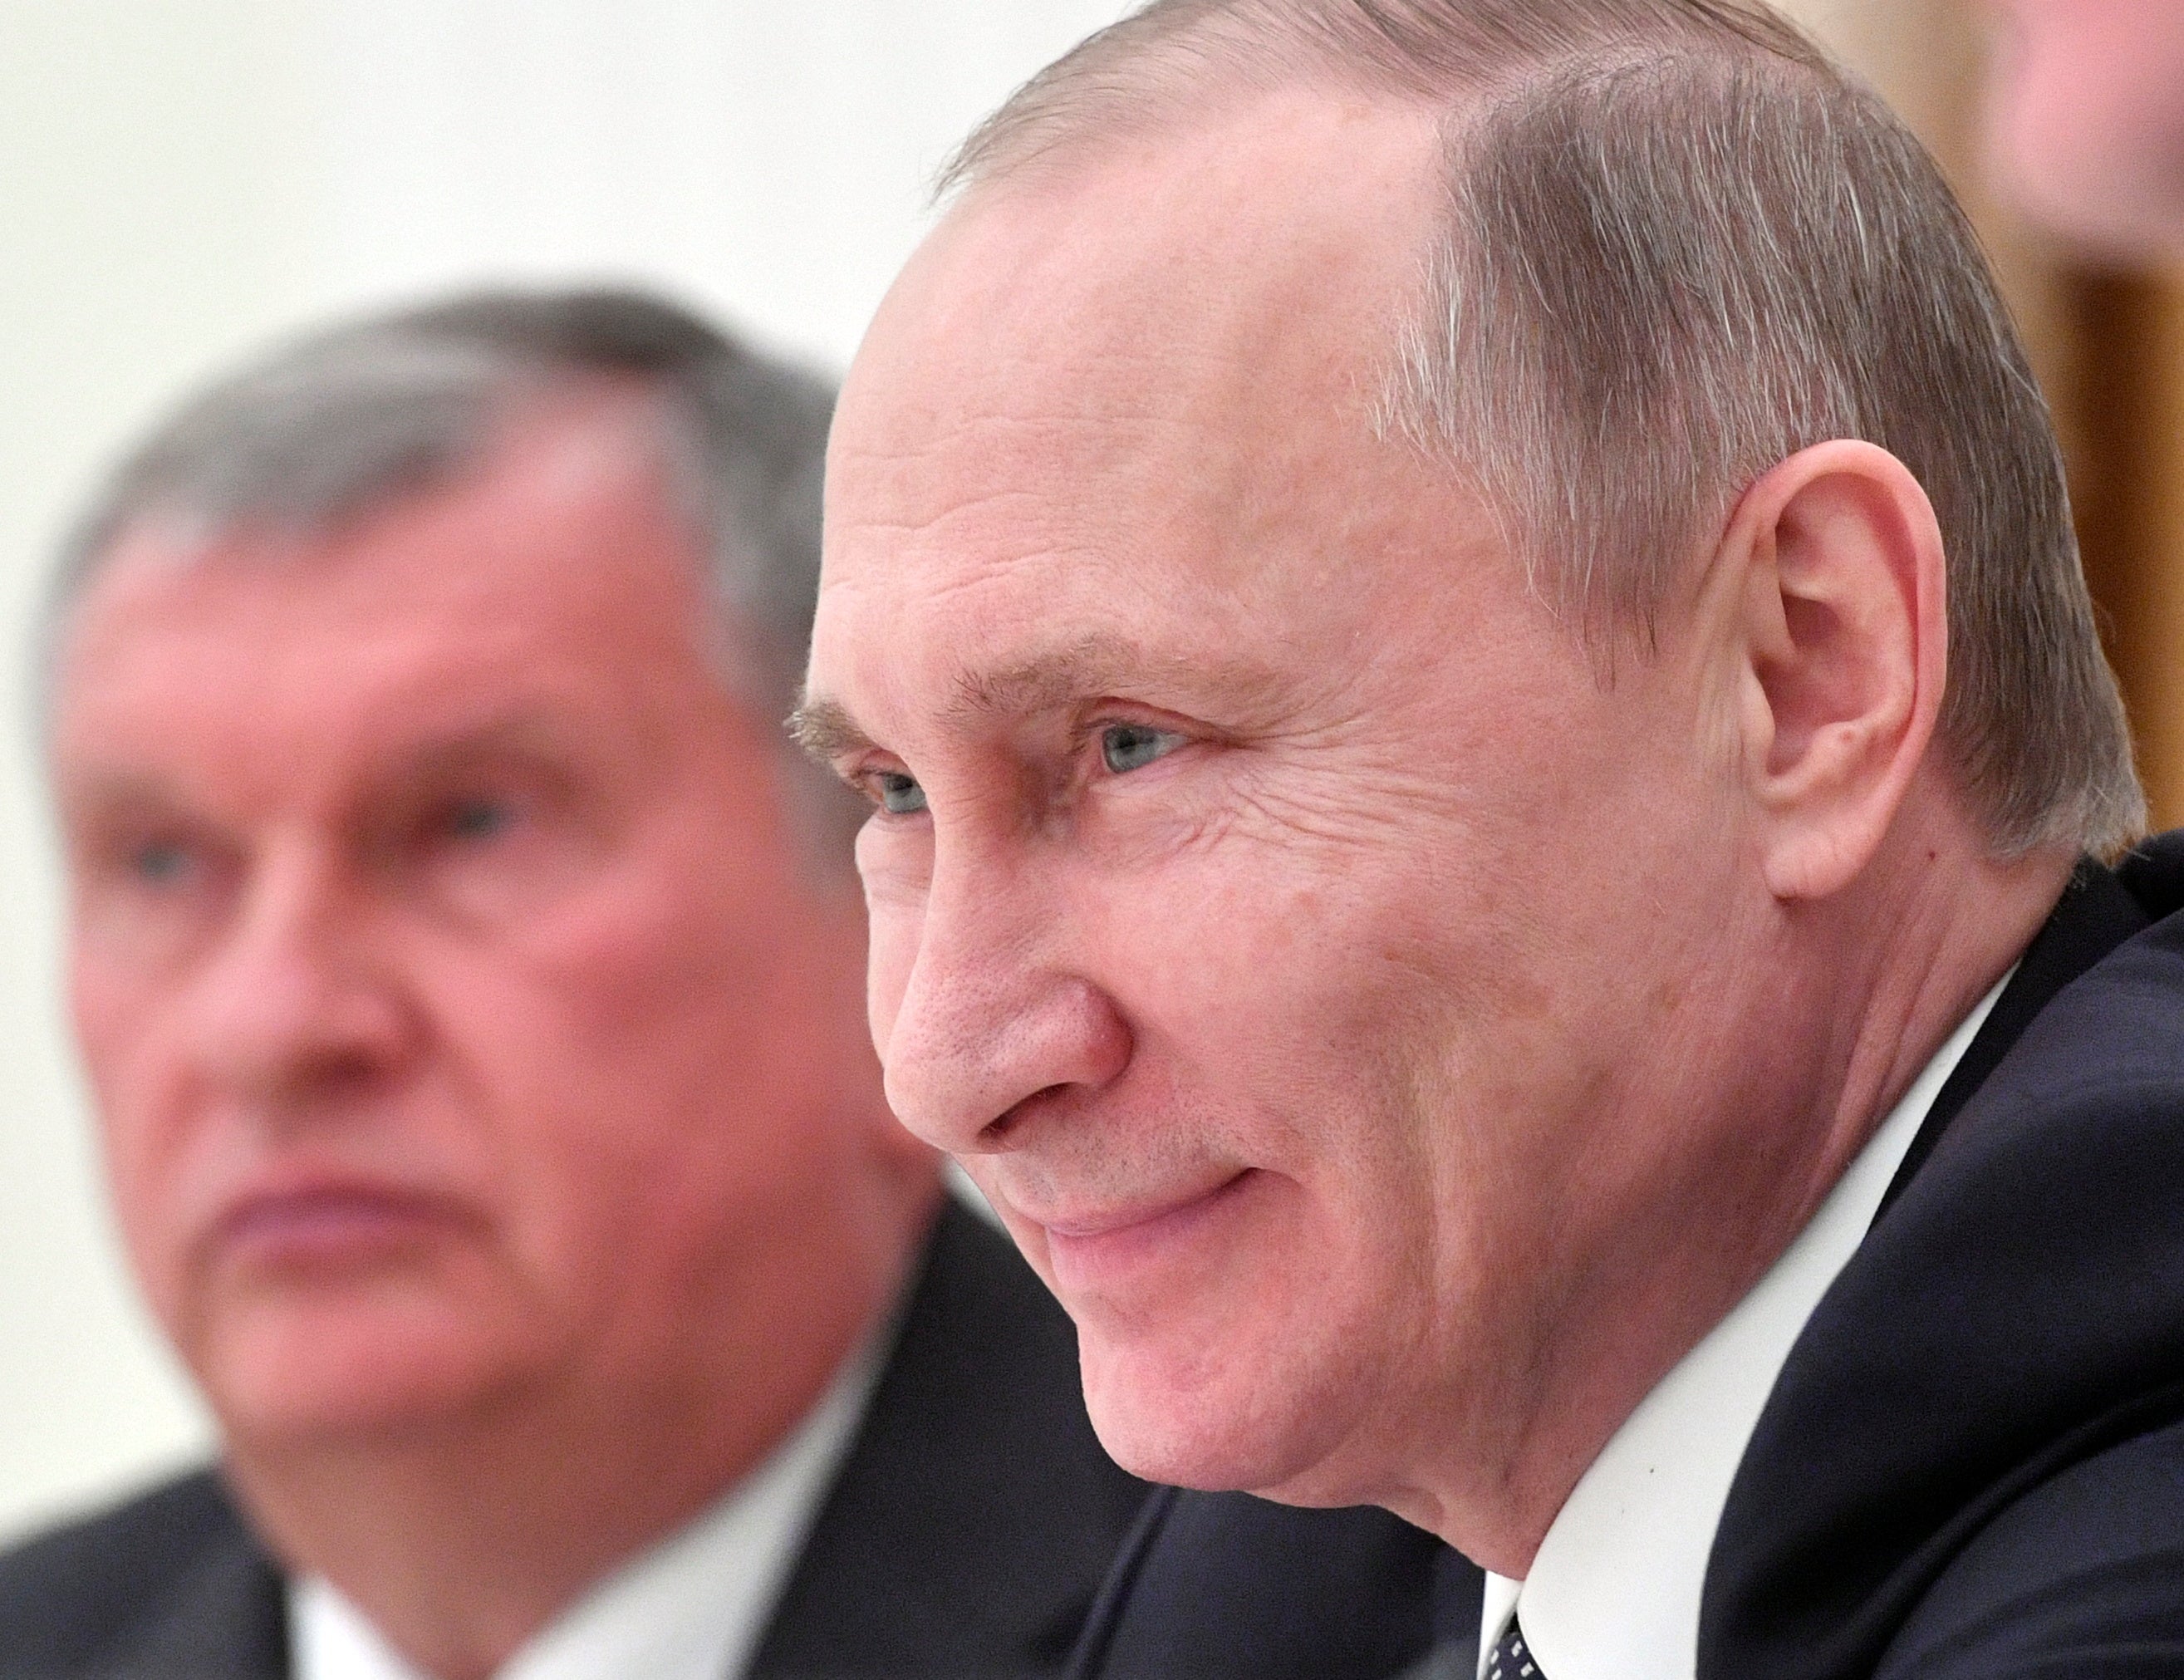 Sechin (left) is pictured alongside Putin in 2017